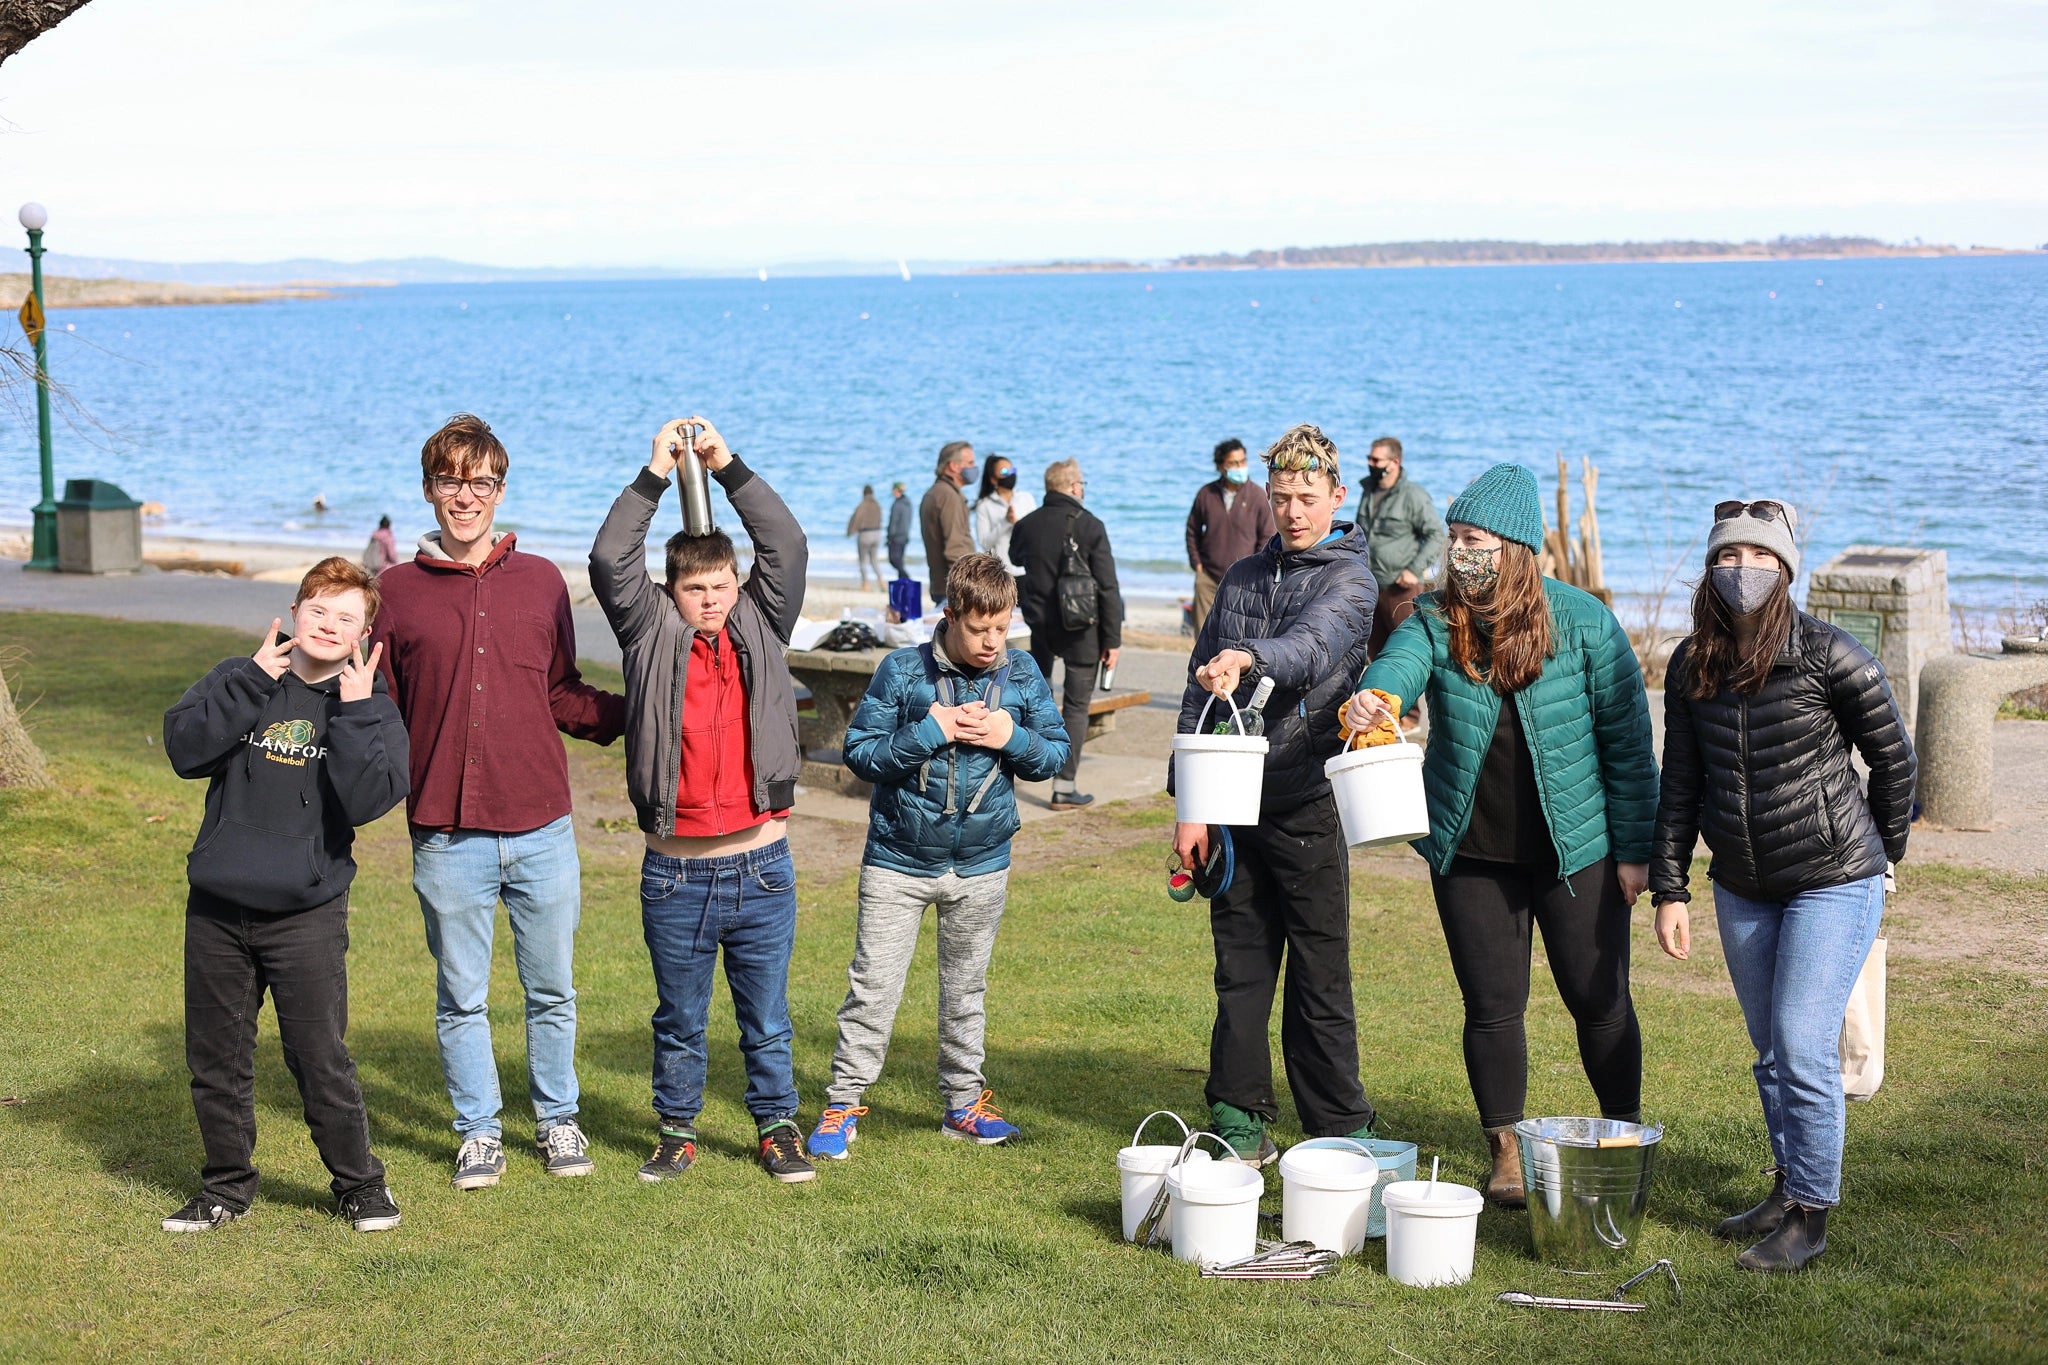 Nature Bee partners with local organizations to give back through community events and donations. Picture includes the nature bee team and members of the community outdoors doing a beach clean up. 